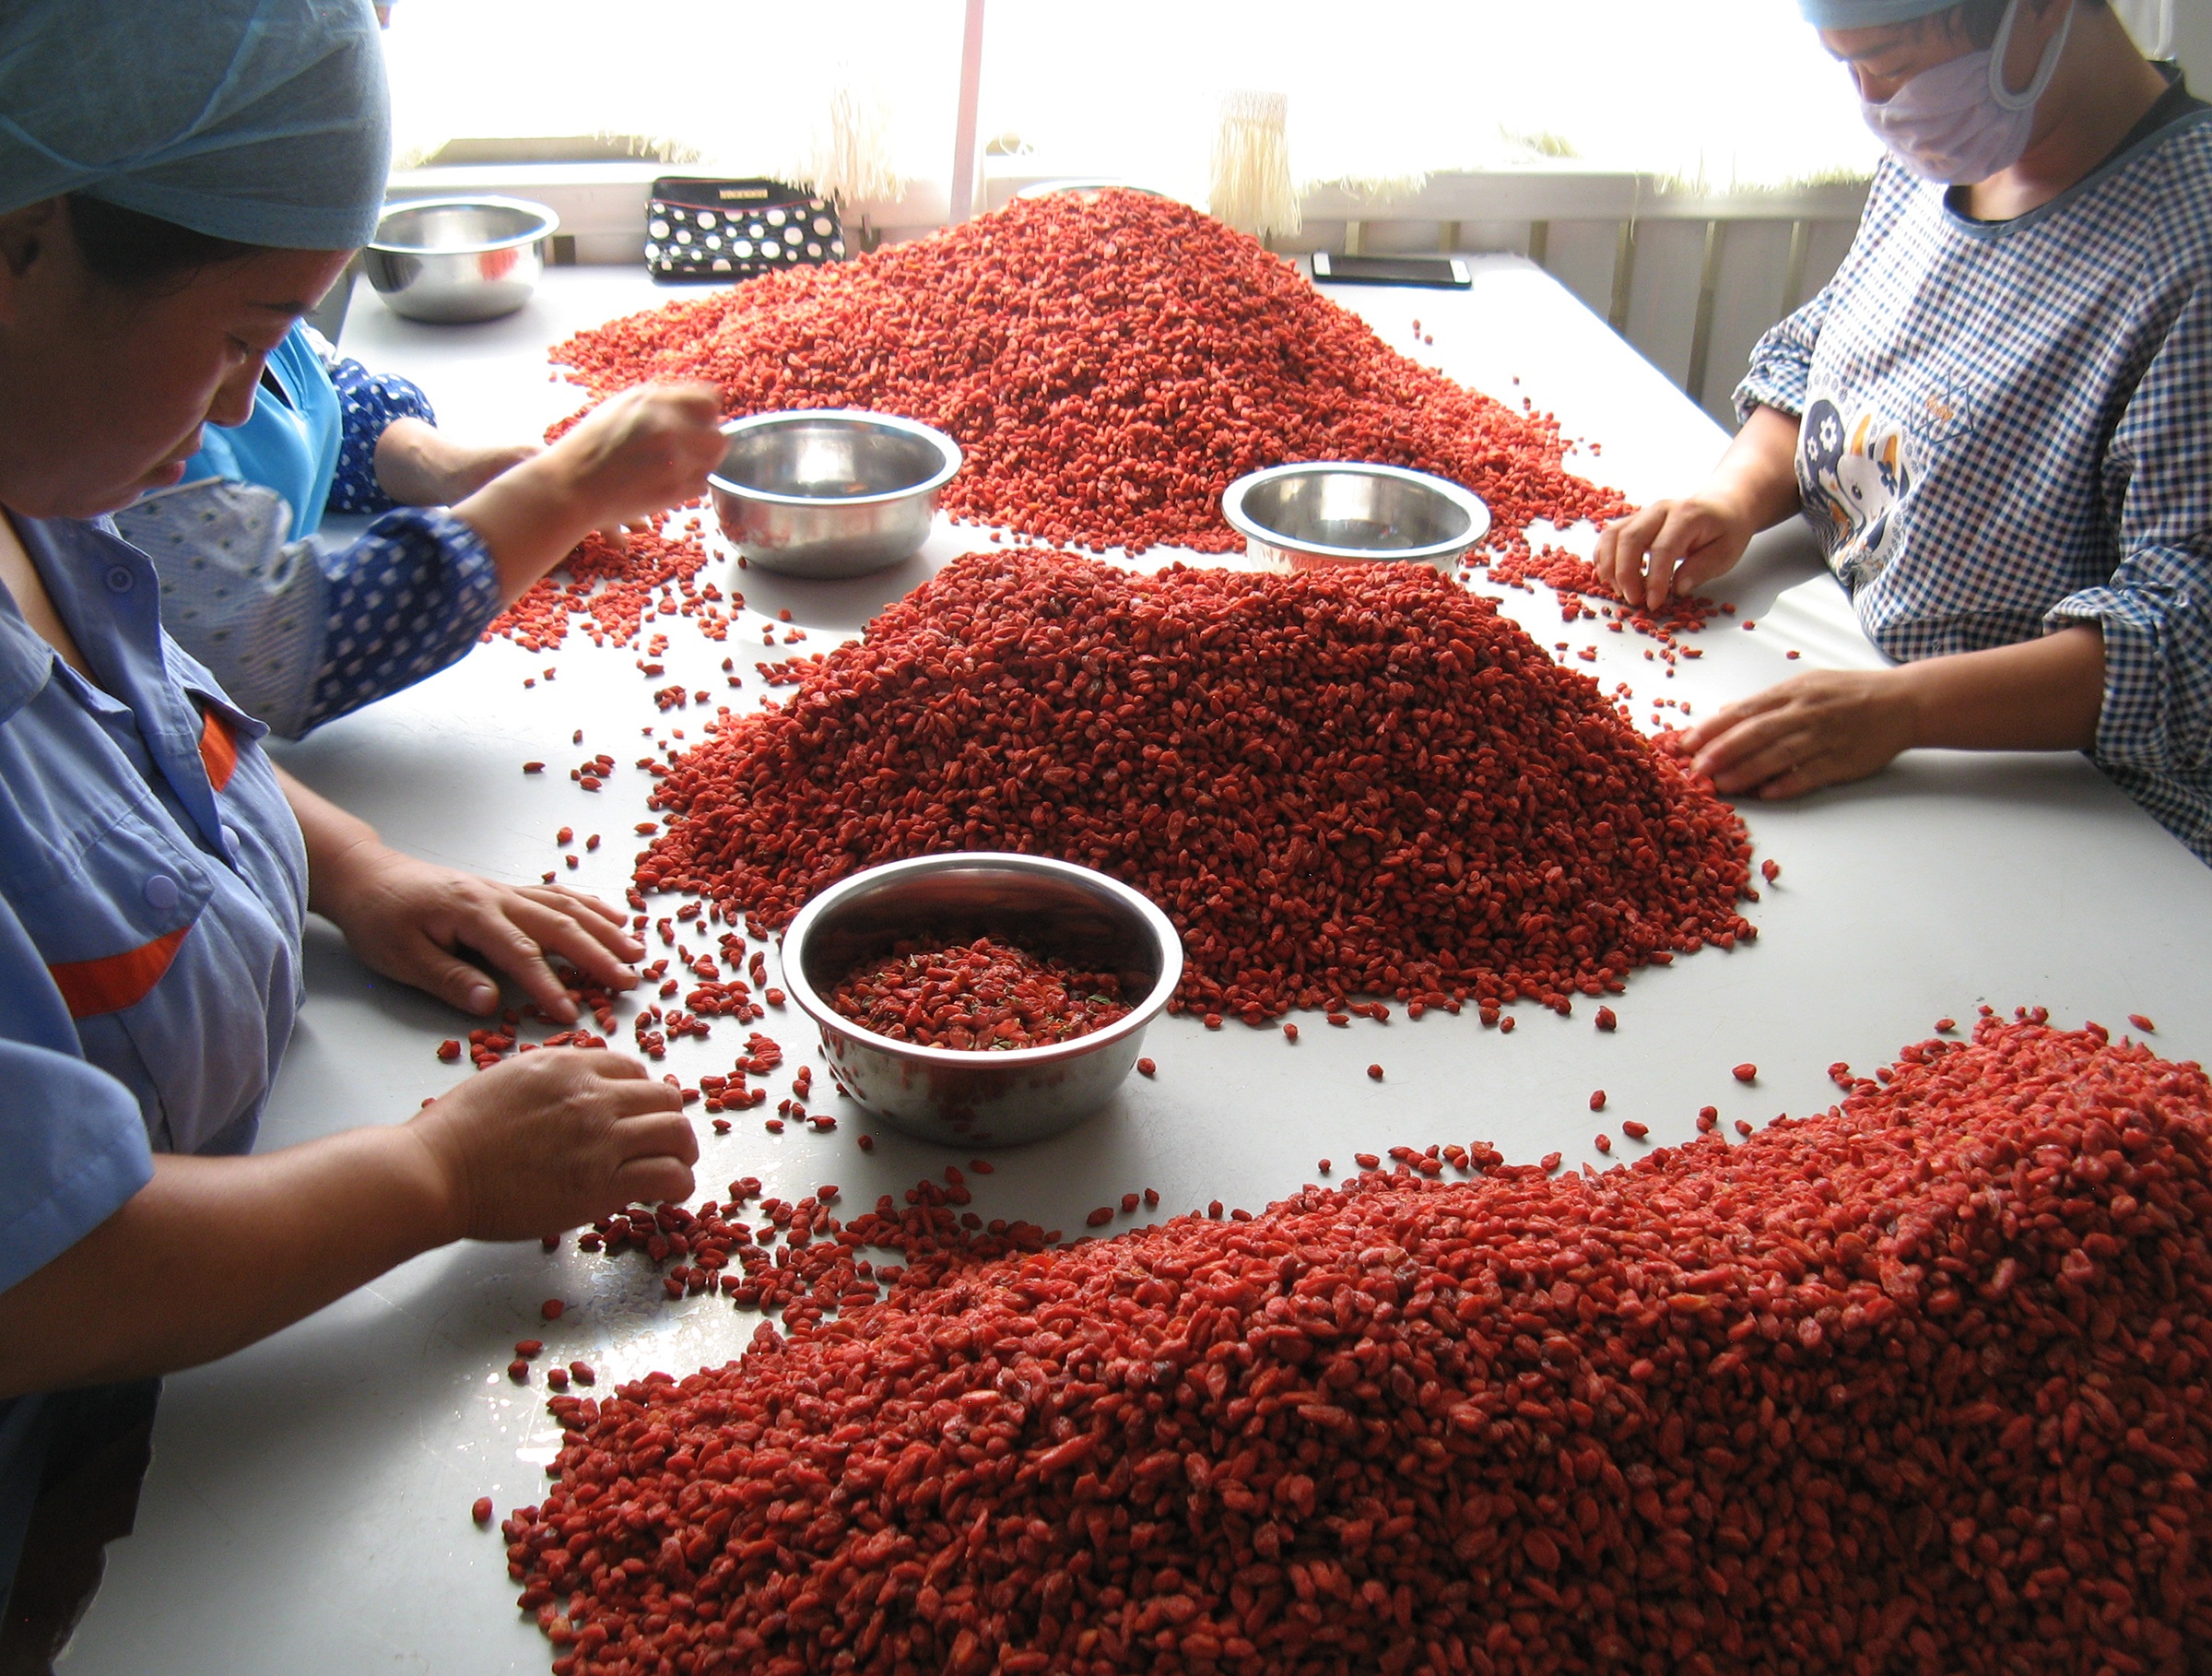 Lycii berries being hand sorted by workers sitting at a table in China